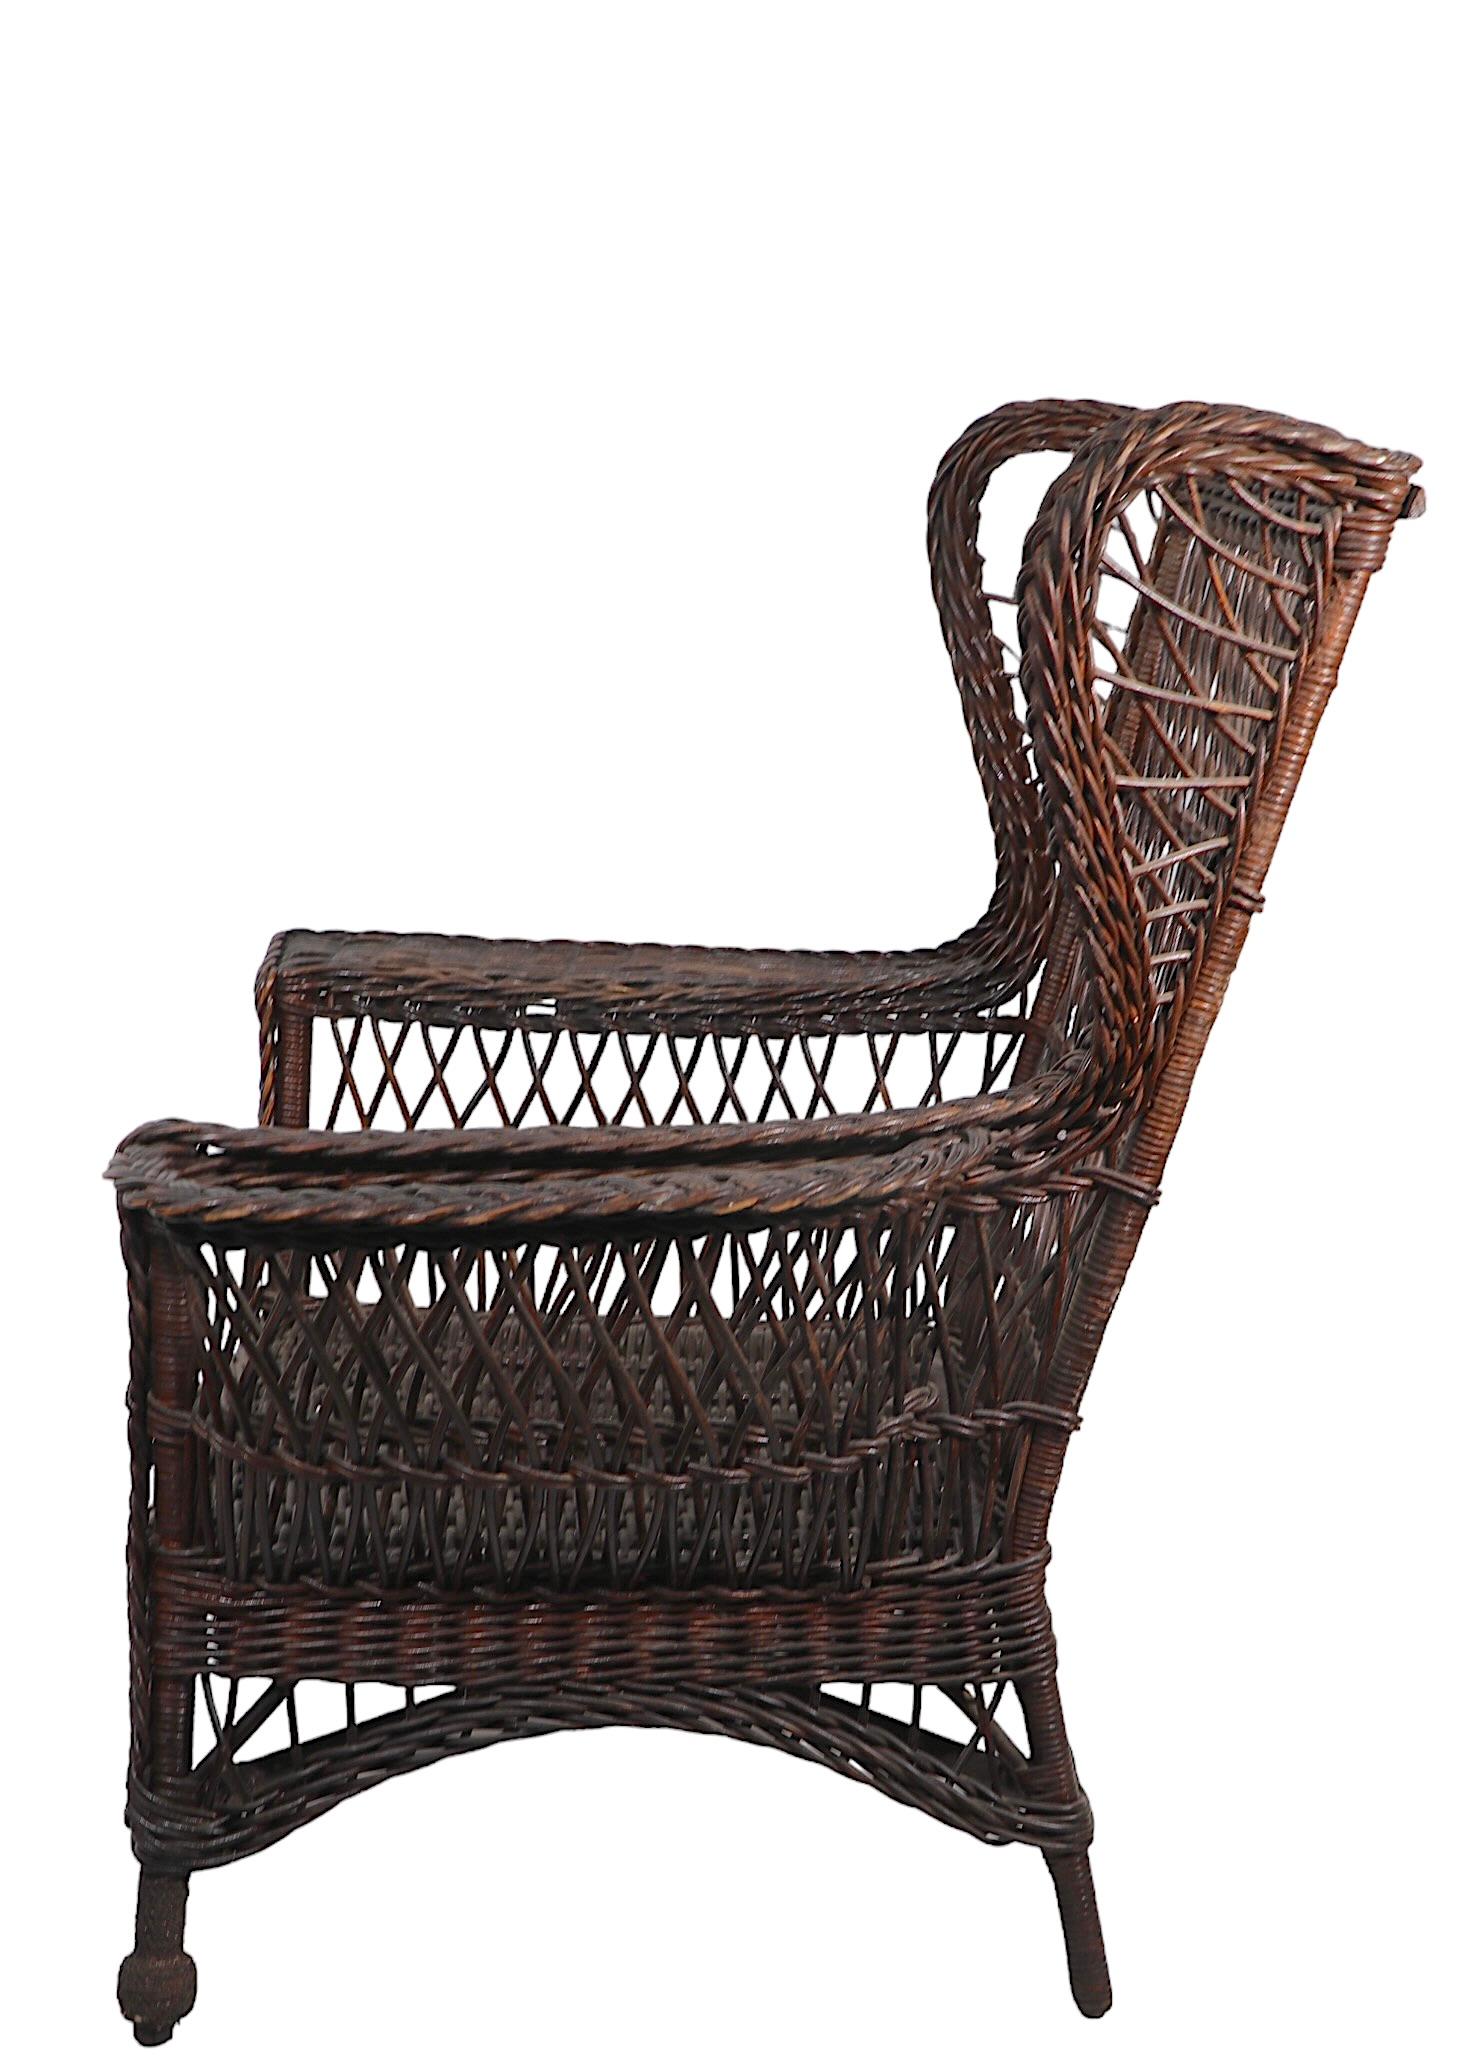 Victorian Bar Harbor Wicker Wing Chair with Magazine Rack Arm For Sale 4